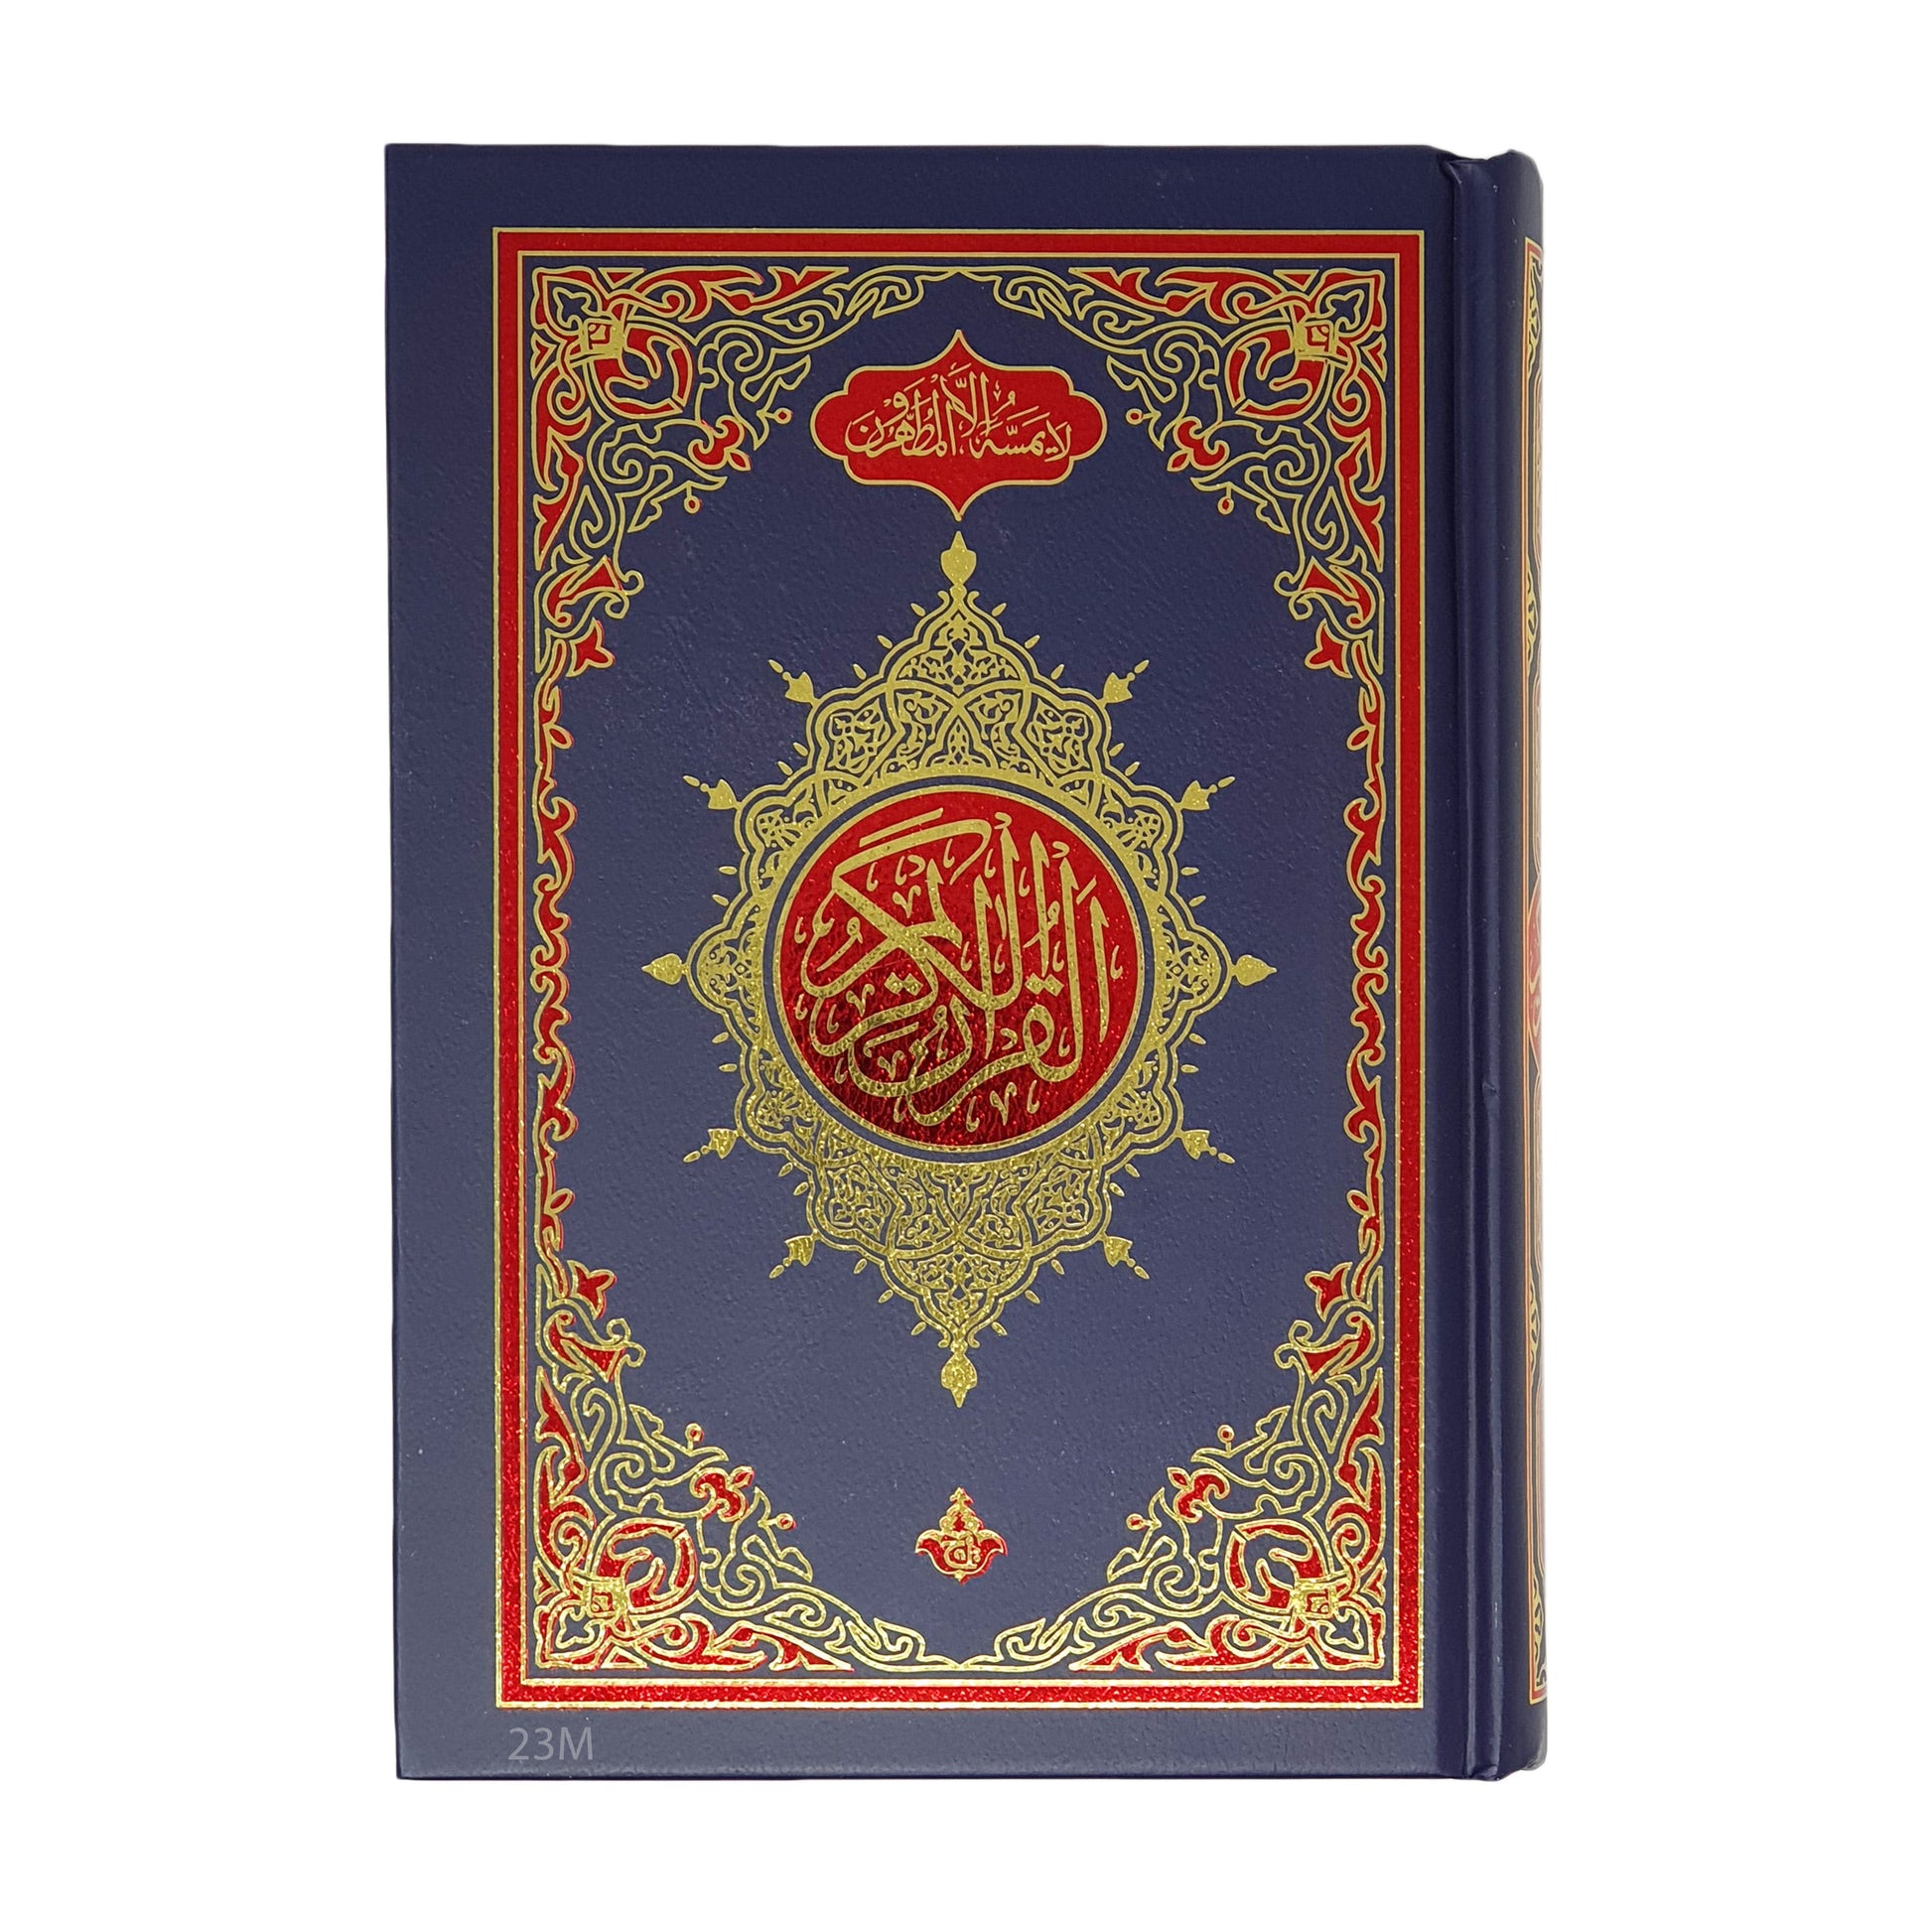 south african quran